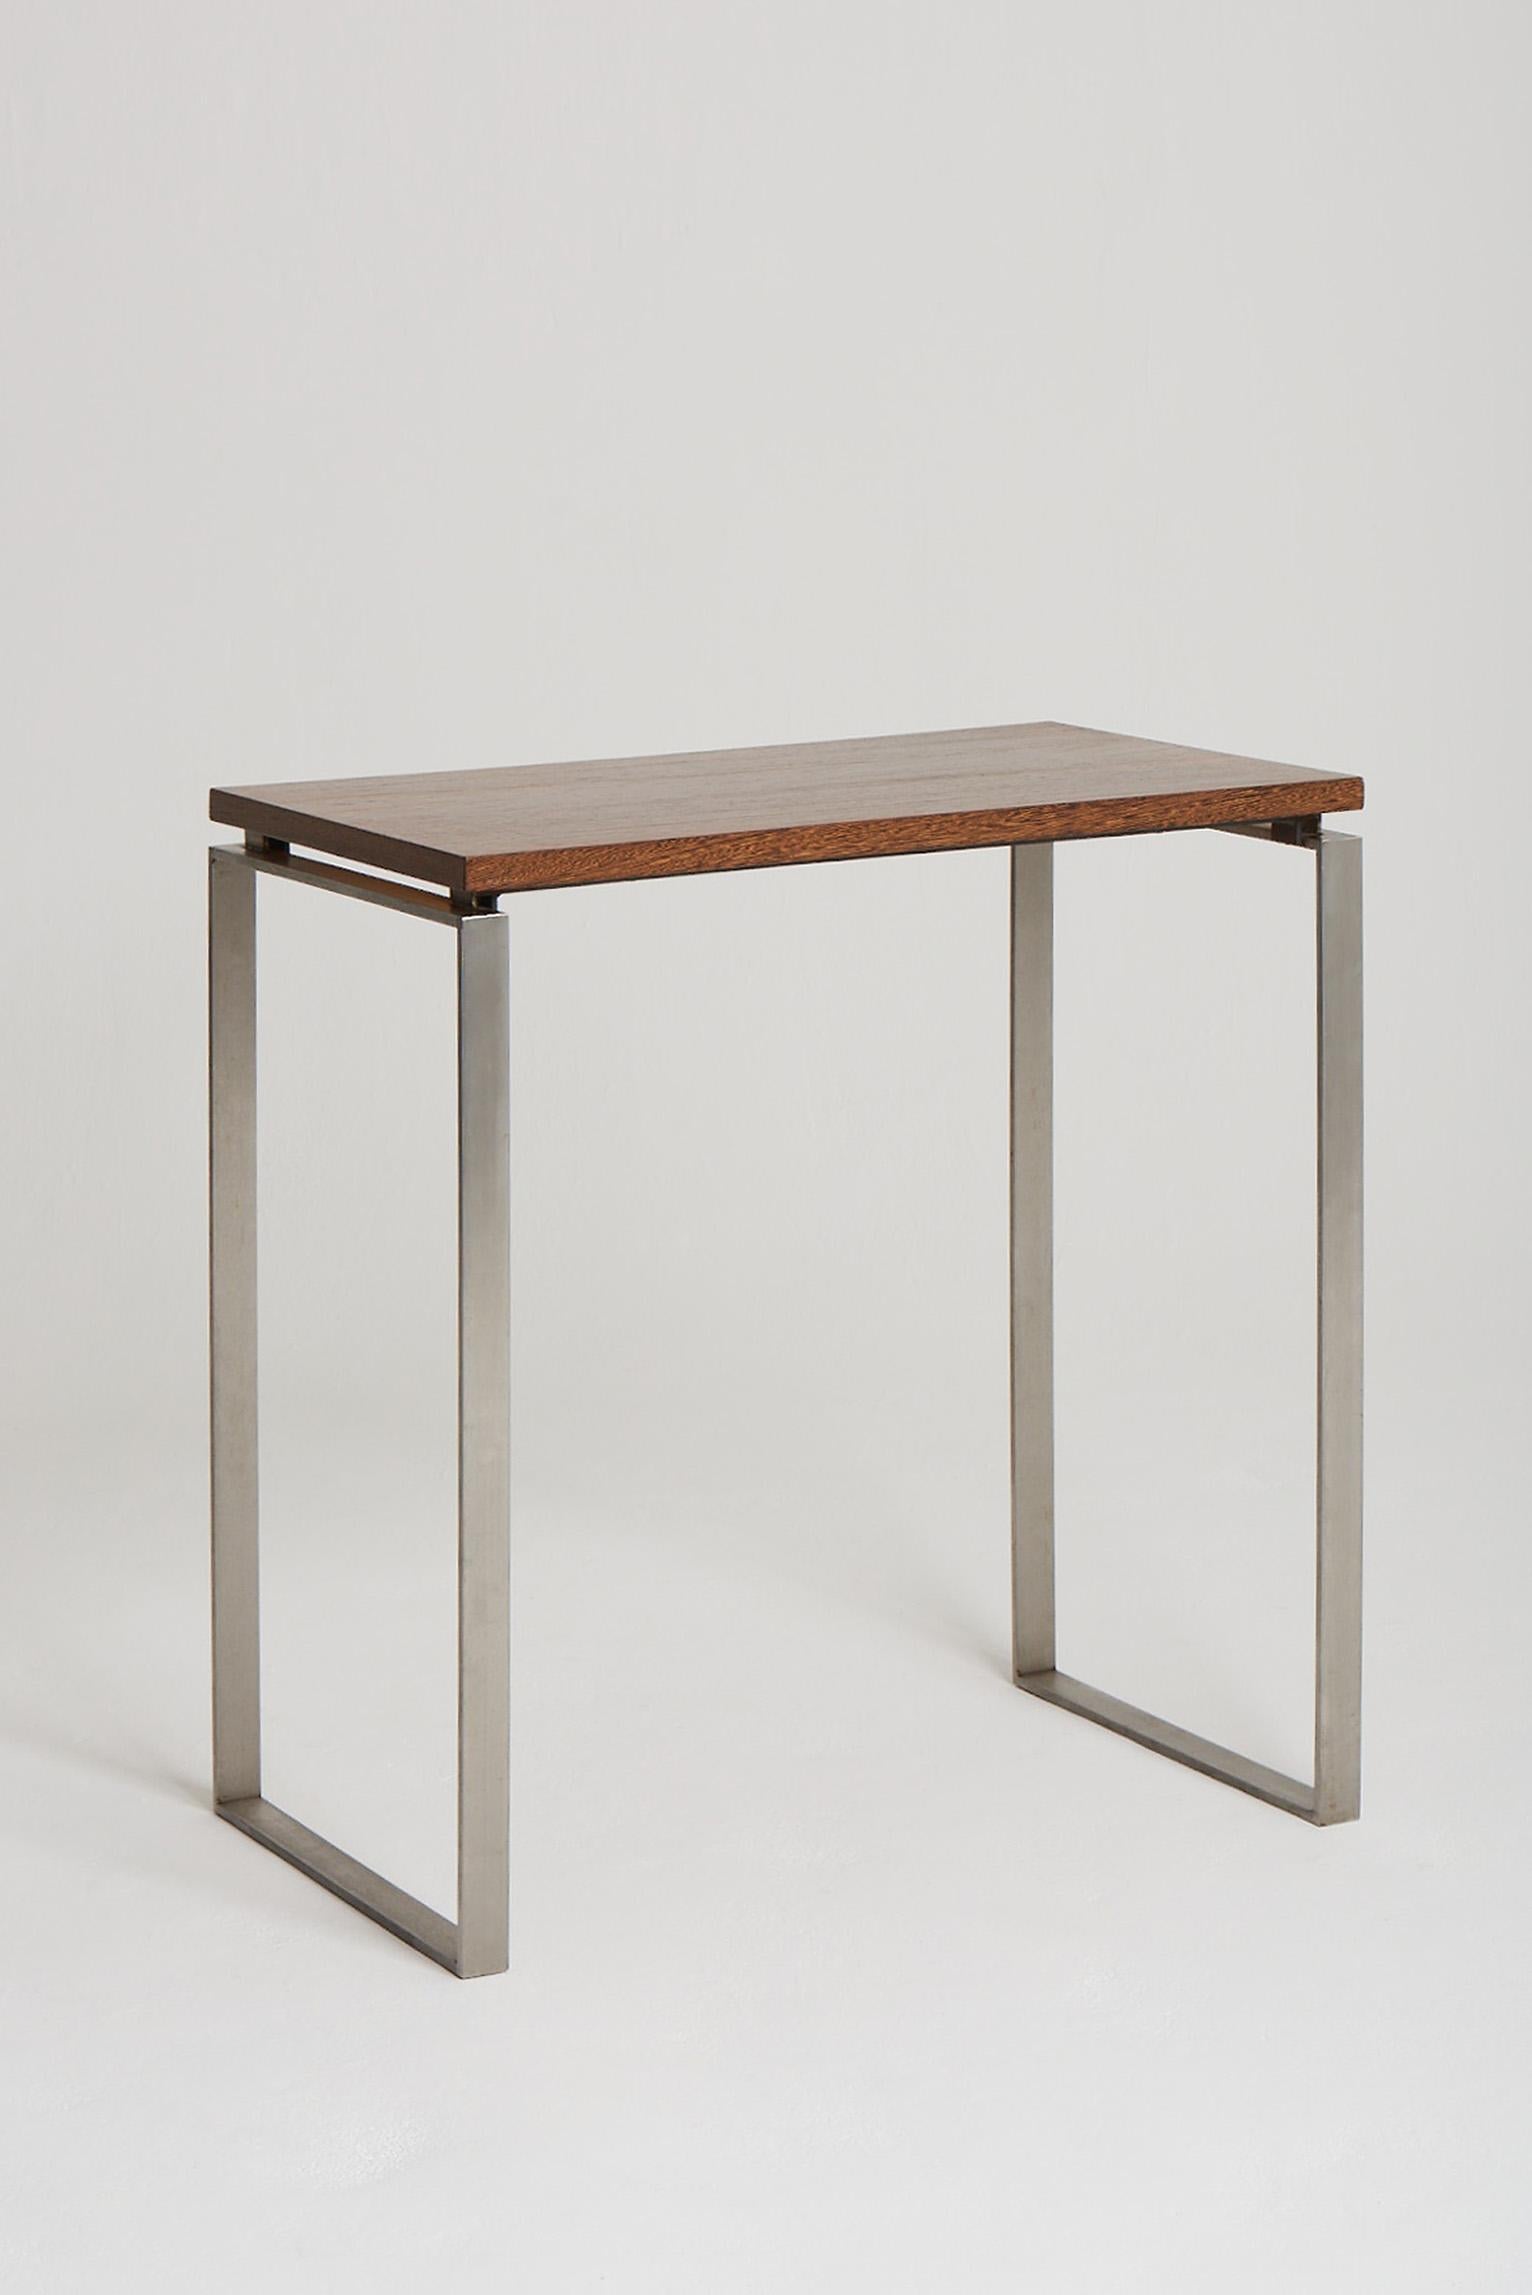 A Modernist brushed steel and palmwood top console table.
France, third quarter of the 20th century.